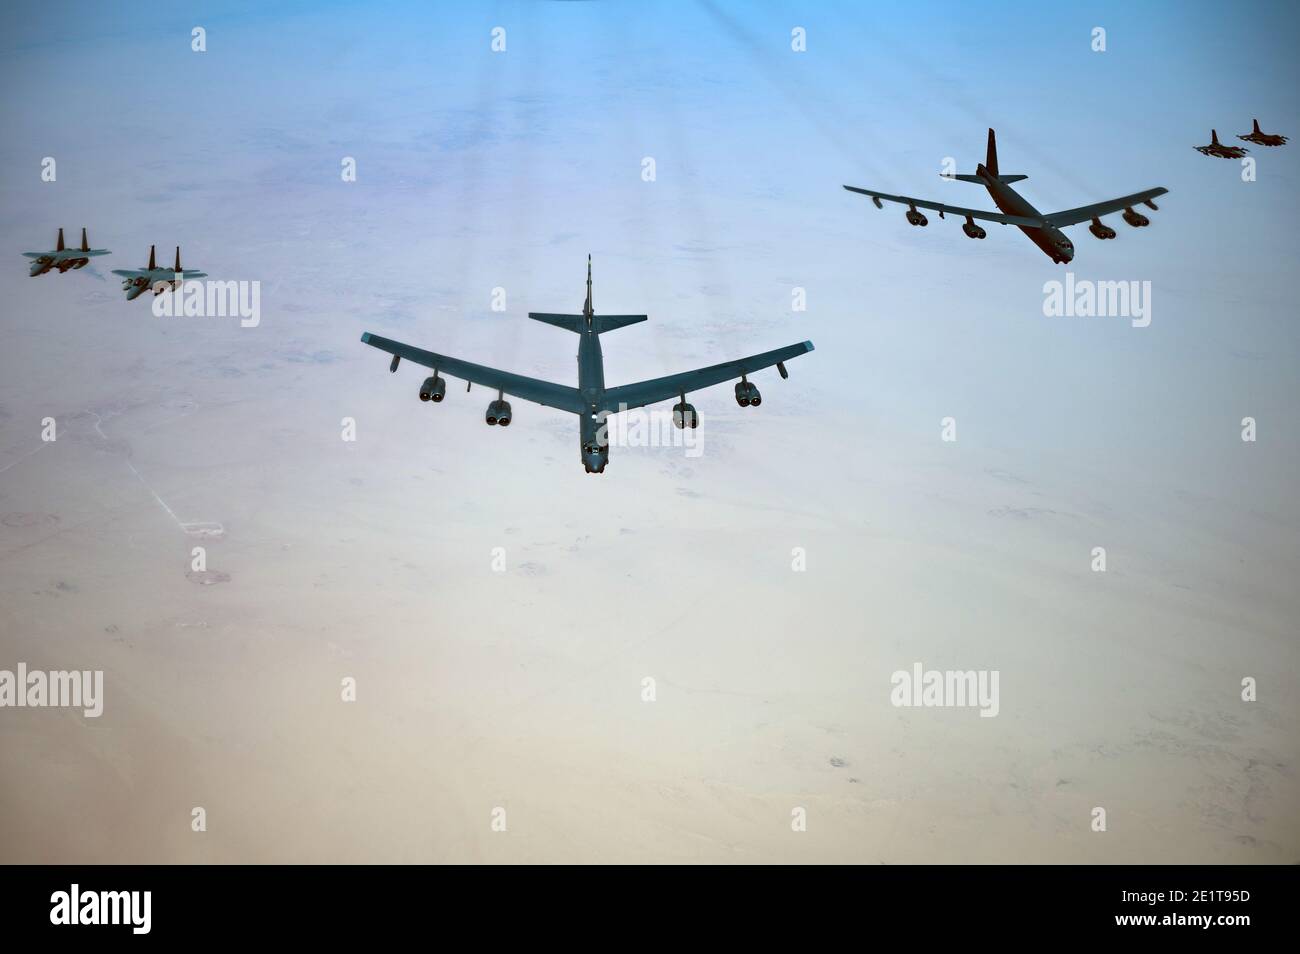 Saudi Arabia, Saudi Arabia. 07th Jan, 2021. U.S. Air Force B-52 Stratofortress strategic bomber aircraft are escorted by Royal Saudi Arabian Air Force F-15S/A fighters, left, and U.S. Air Force F-16 Fighting Falcons as they fly over Saudi airspace January 7, 2021 in Saudi Arabia. The bomber and escort is a show of force mission as a message to Iran. Credit: Planetpix/Alamy Live News Stock Photo